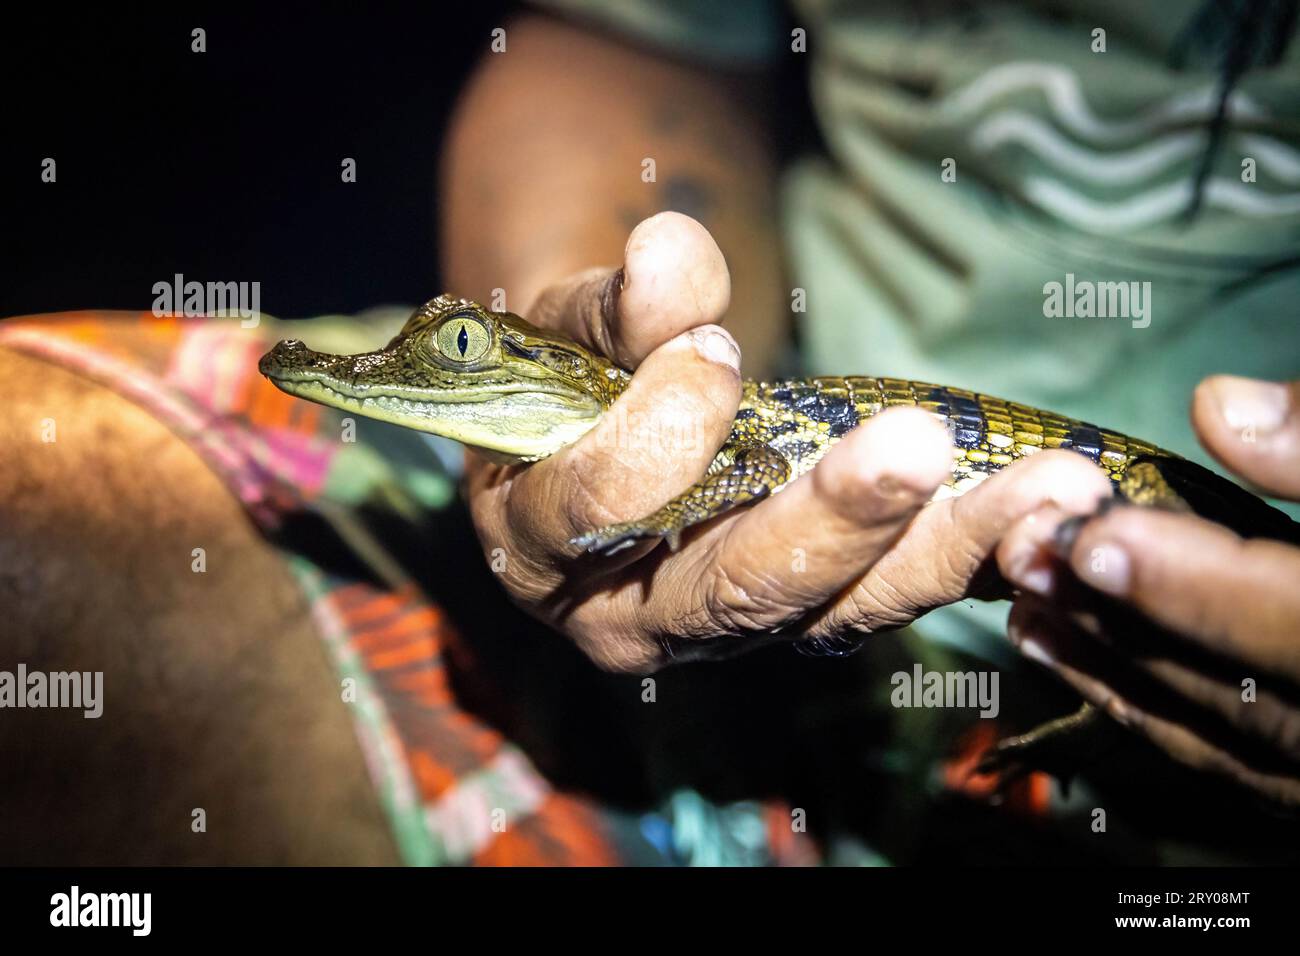 Baby caiman reptile holding at night from amazon jungle tour Stock Photo